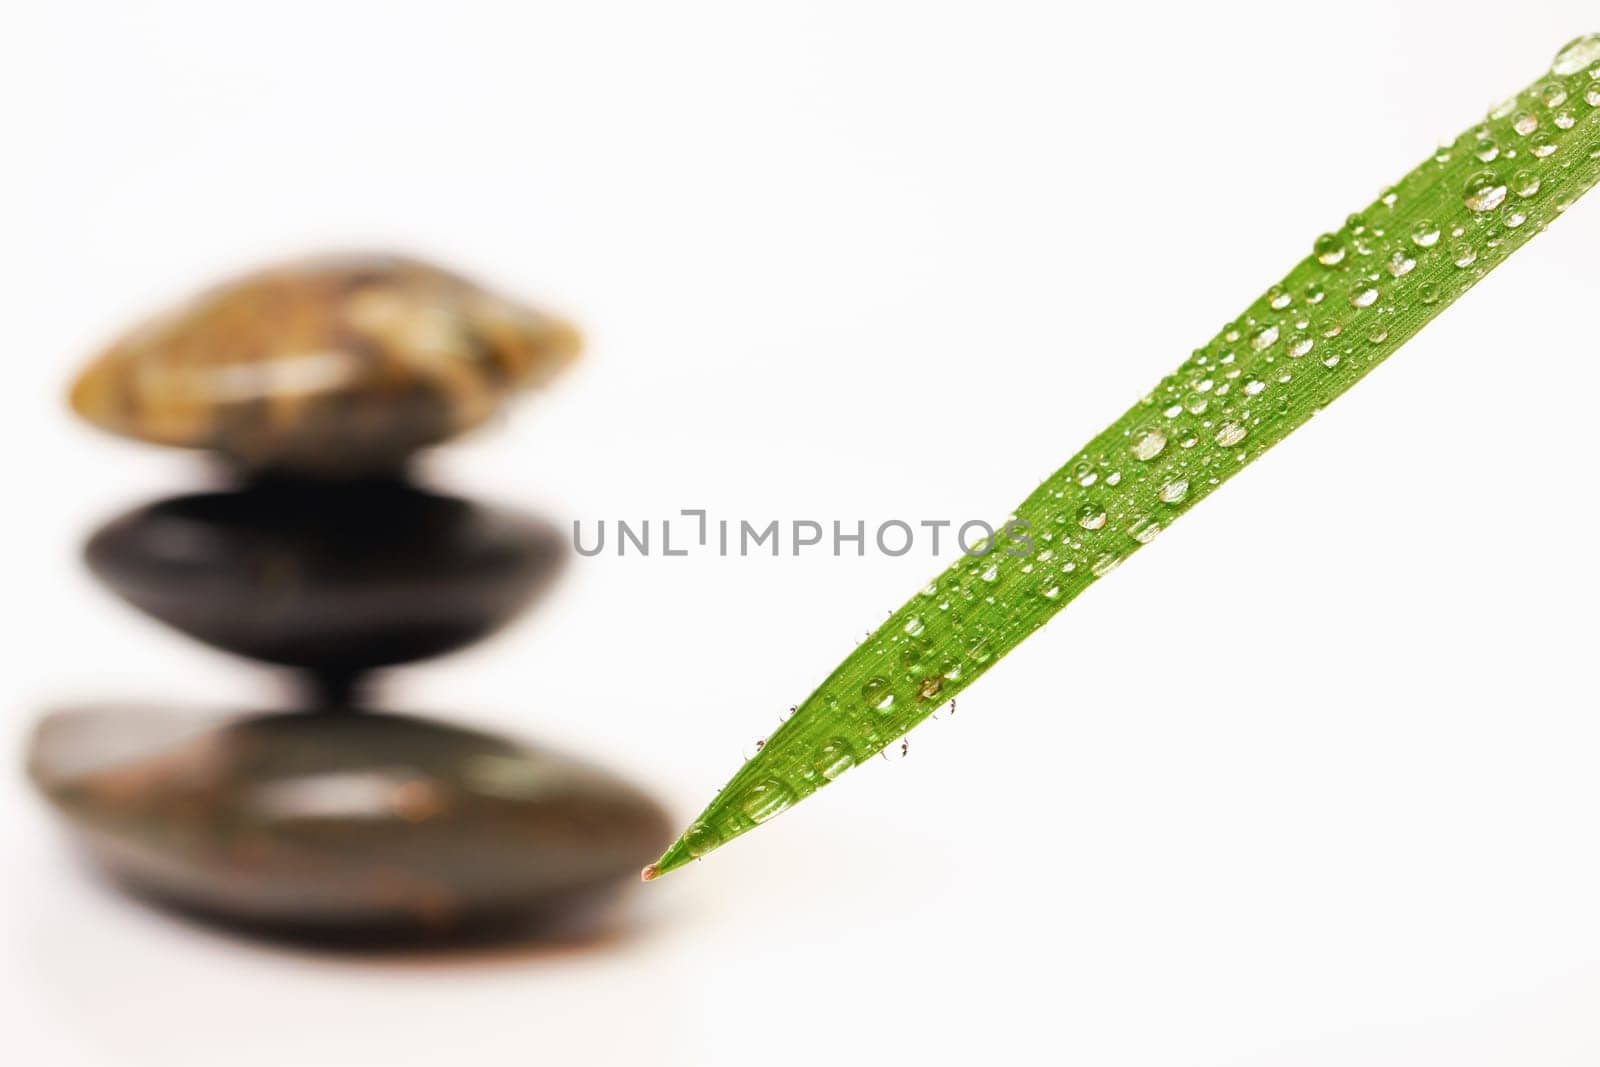 green leaf with dewdrops and stacked stones, zen image isolated on white background